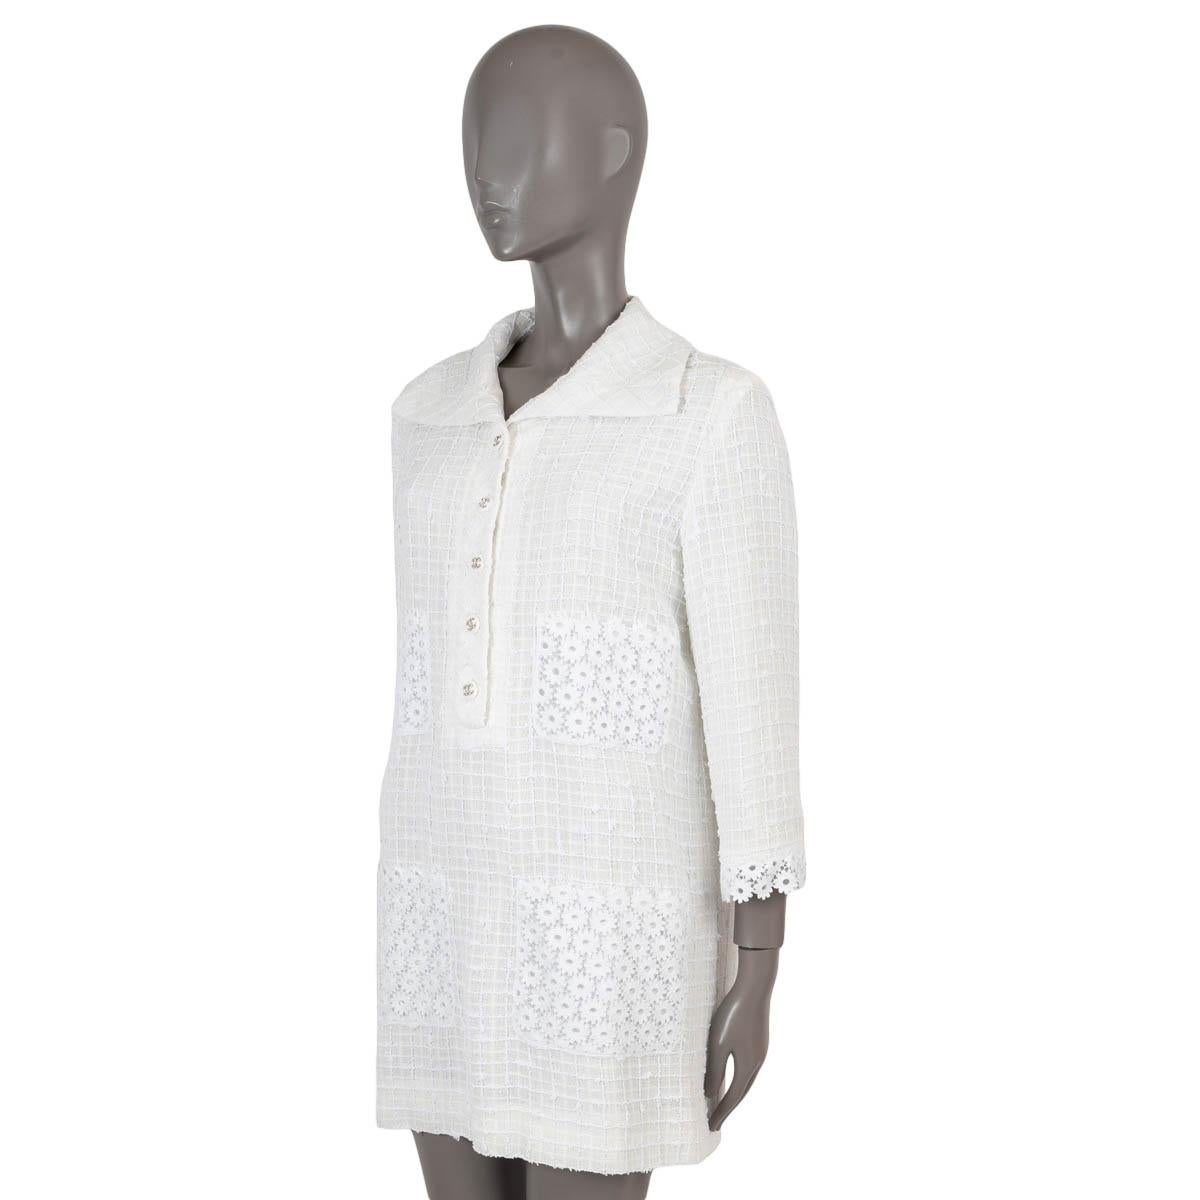 100% authentic Chanel tweed shirt dress in cream polyamide (55%), acrylic (22%), cotton (21%) and viscose (2%). Features a wide spread collar, 3/4 sleeves with floral lace cuffs and four floral lace pockets. Opens partially on the front with